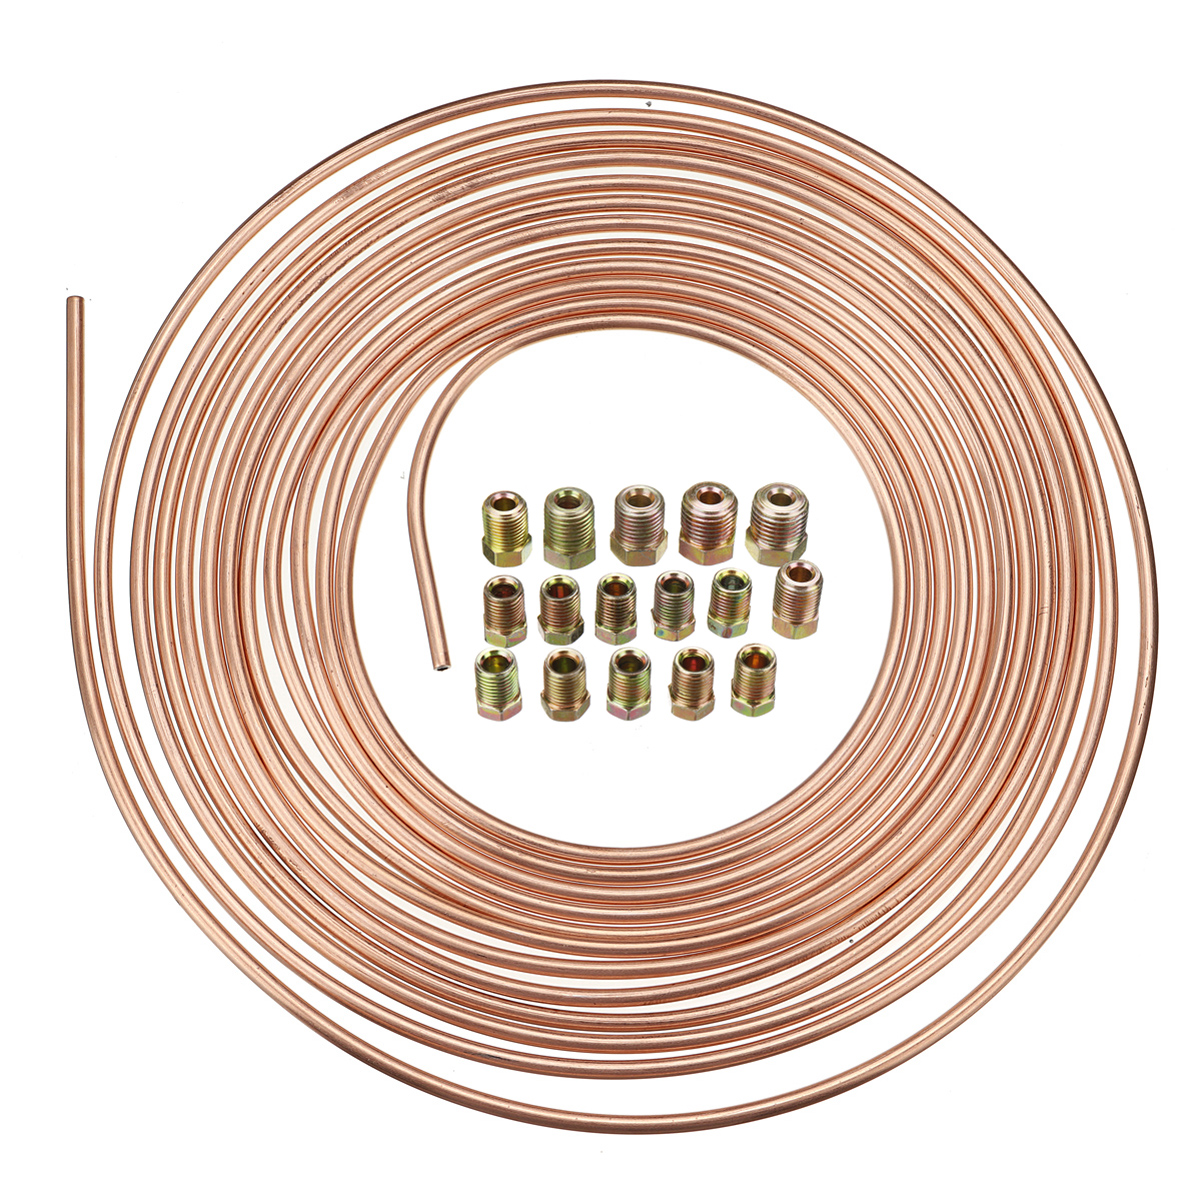 Universal-25Ft-Copper-Nickel-Brake-Line-Tubing-Kit-316quot-OD-with-15Pcs-Nuts-1586631-5